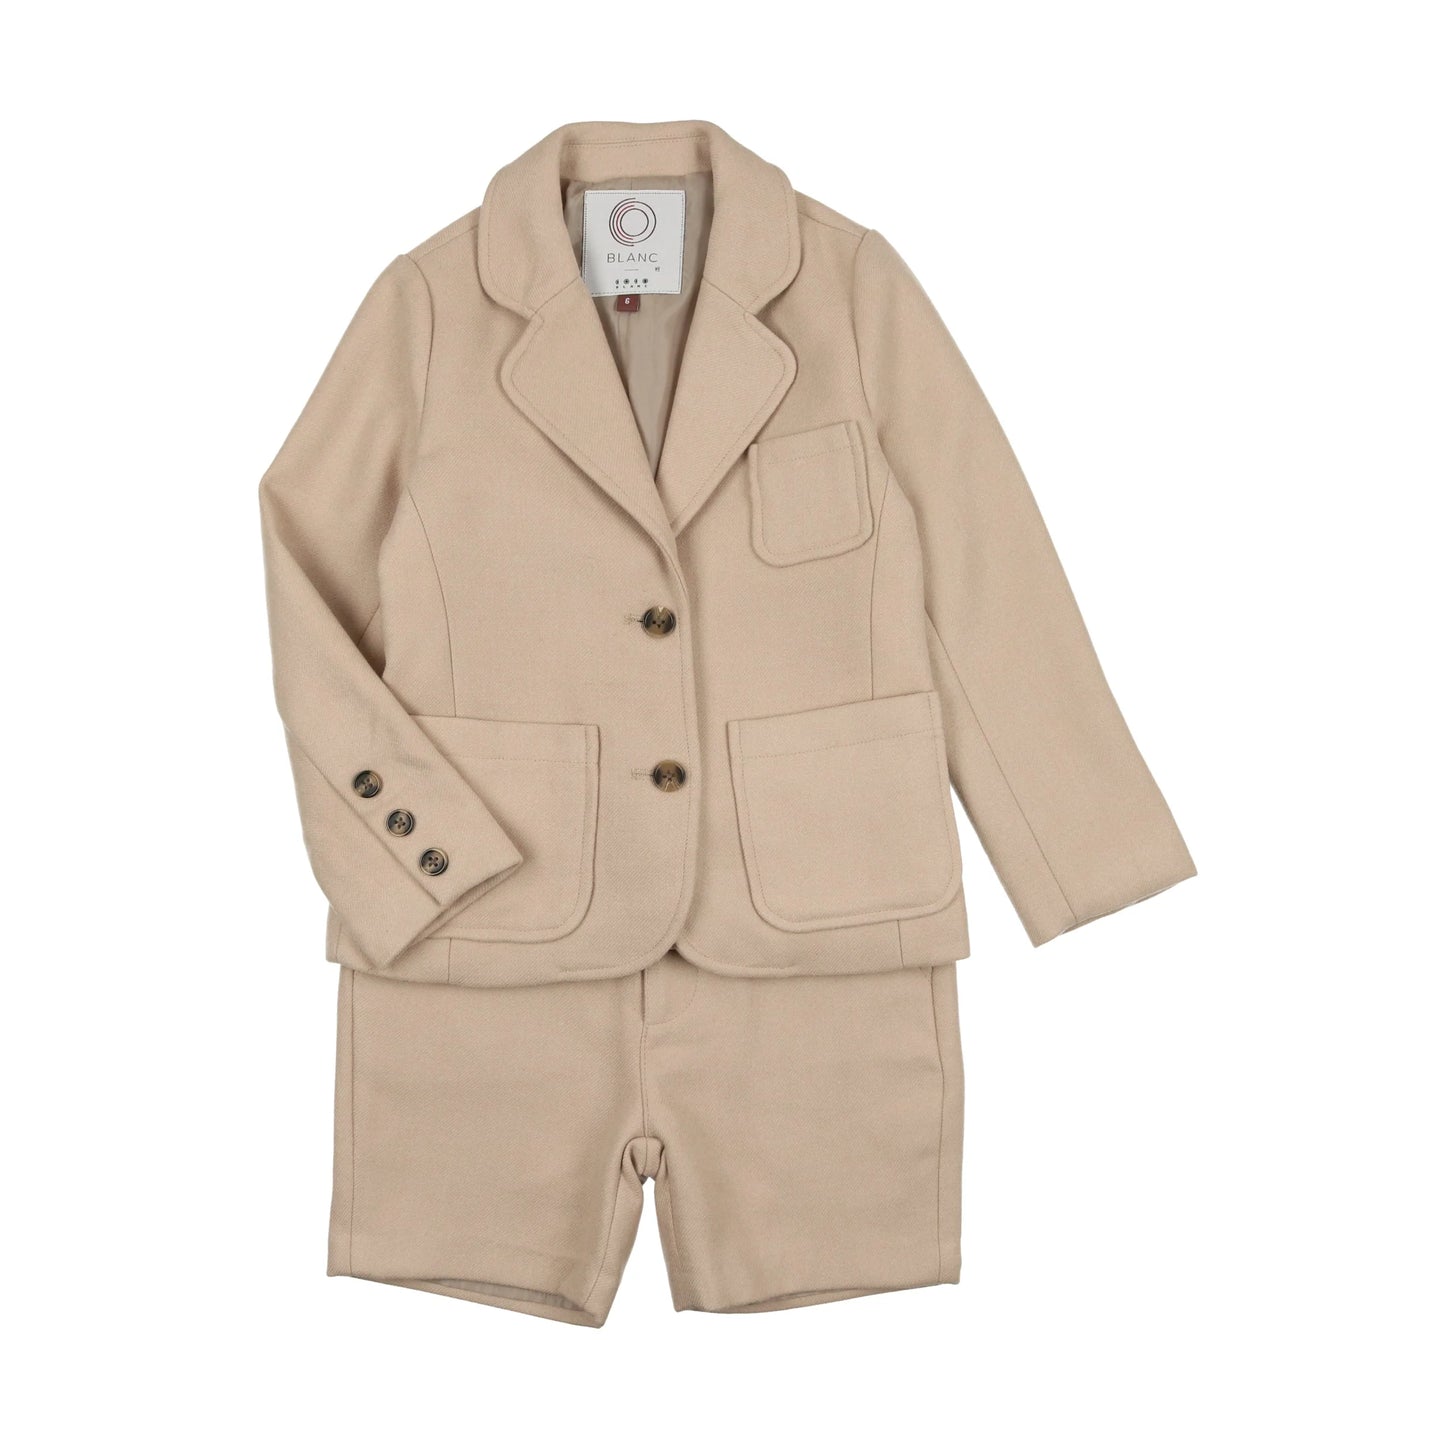 Coco Blanc Wool Jacket & Shorts Suit